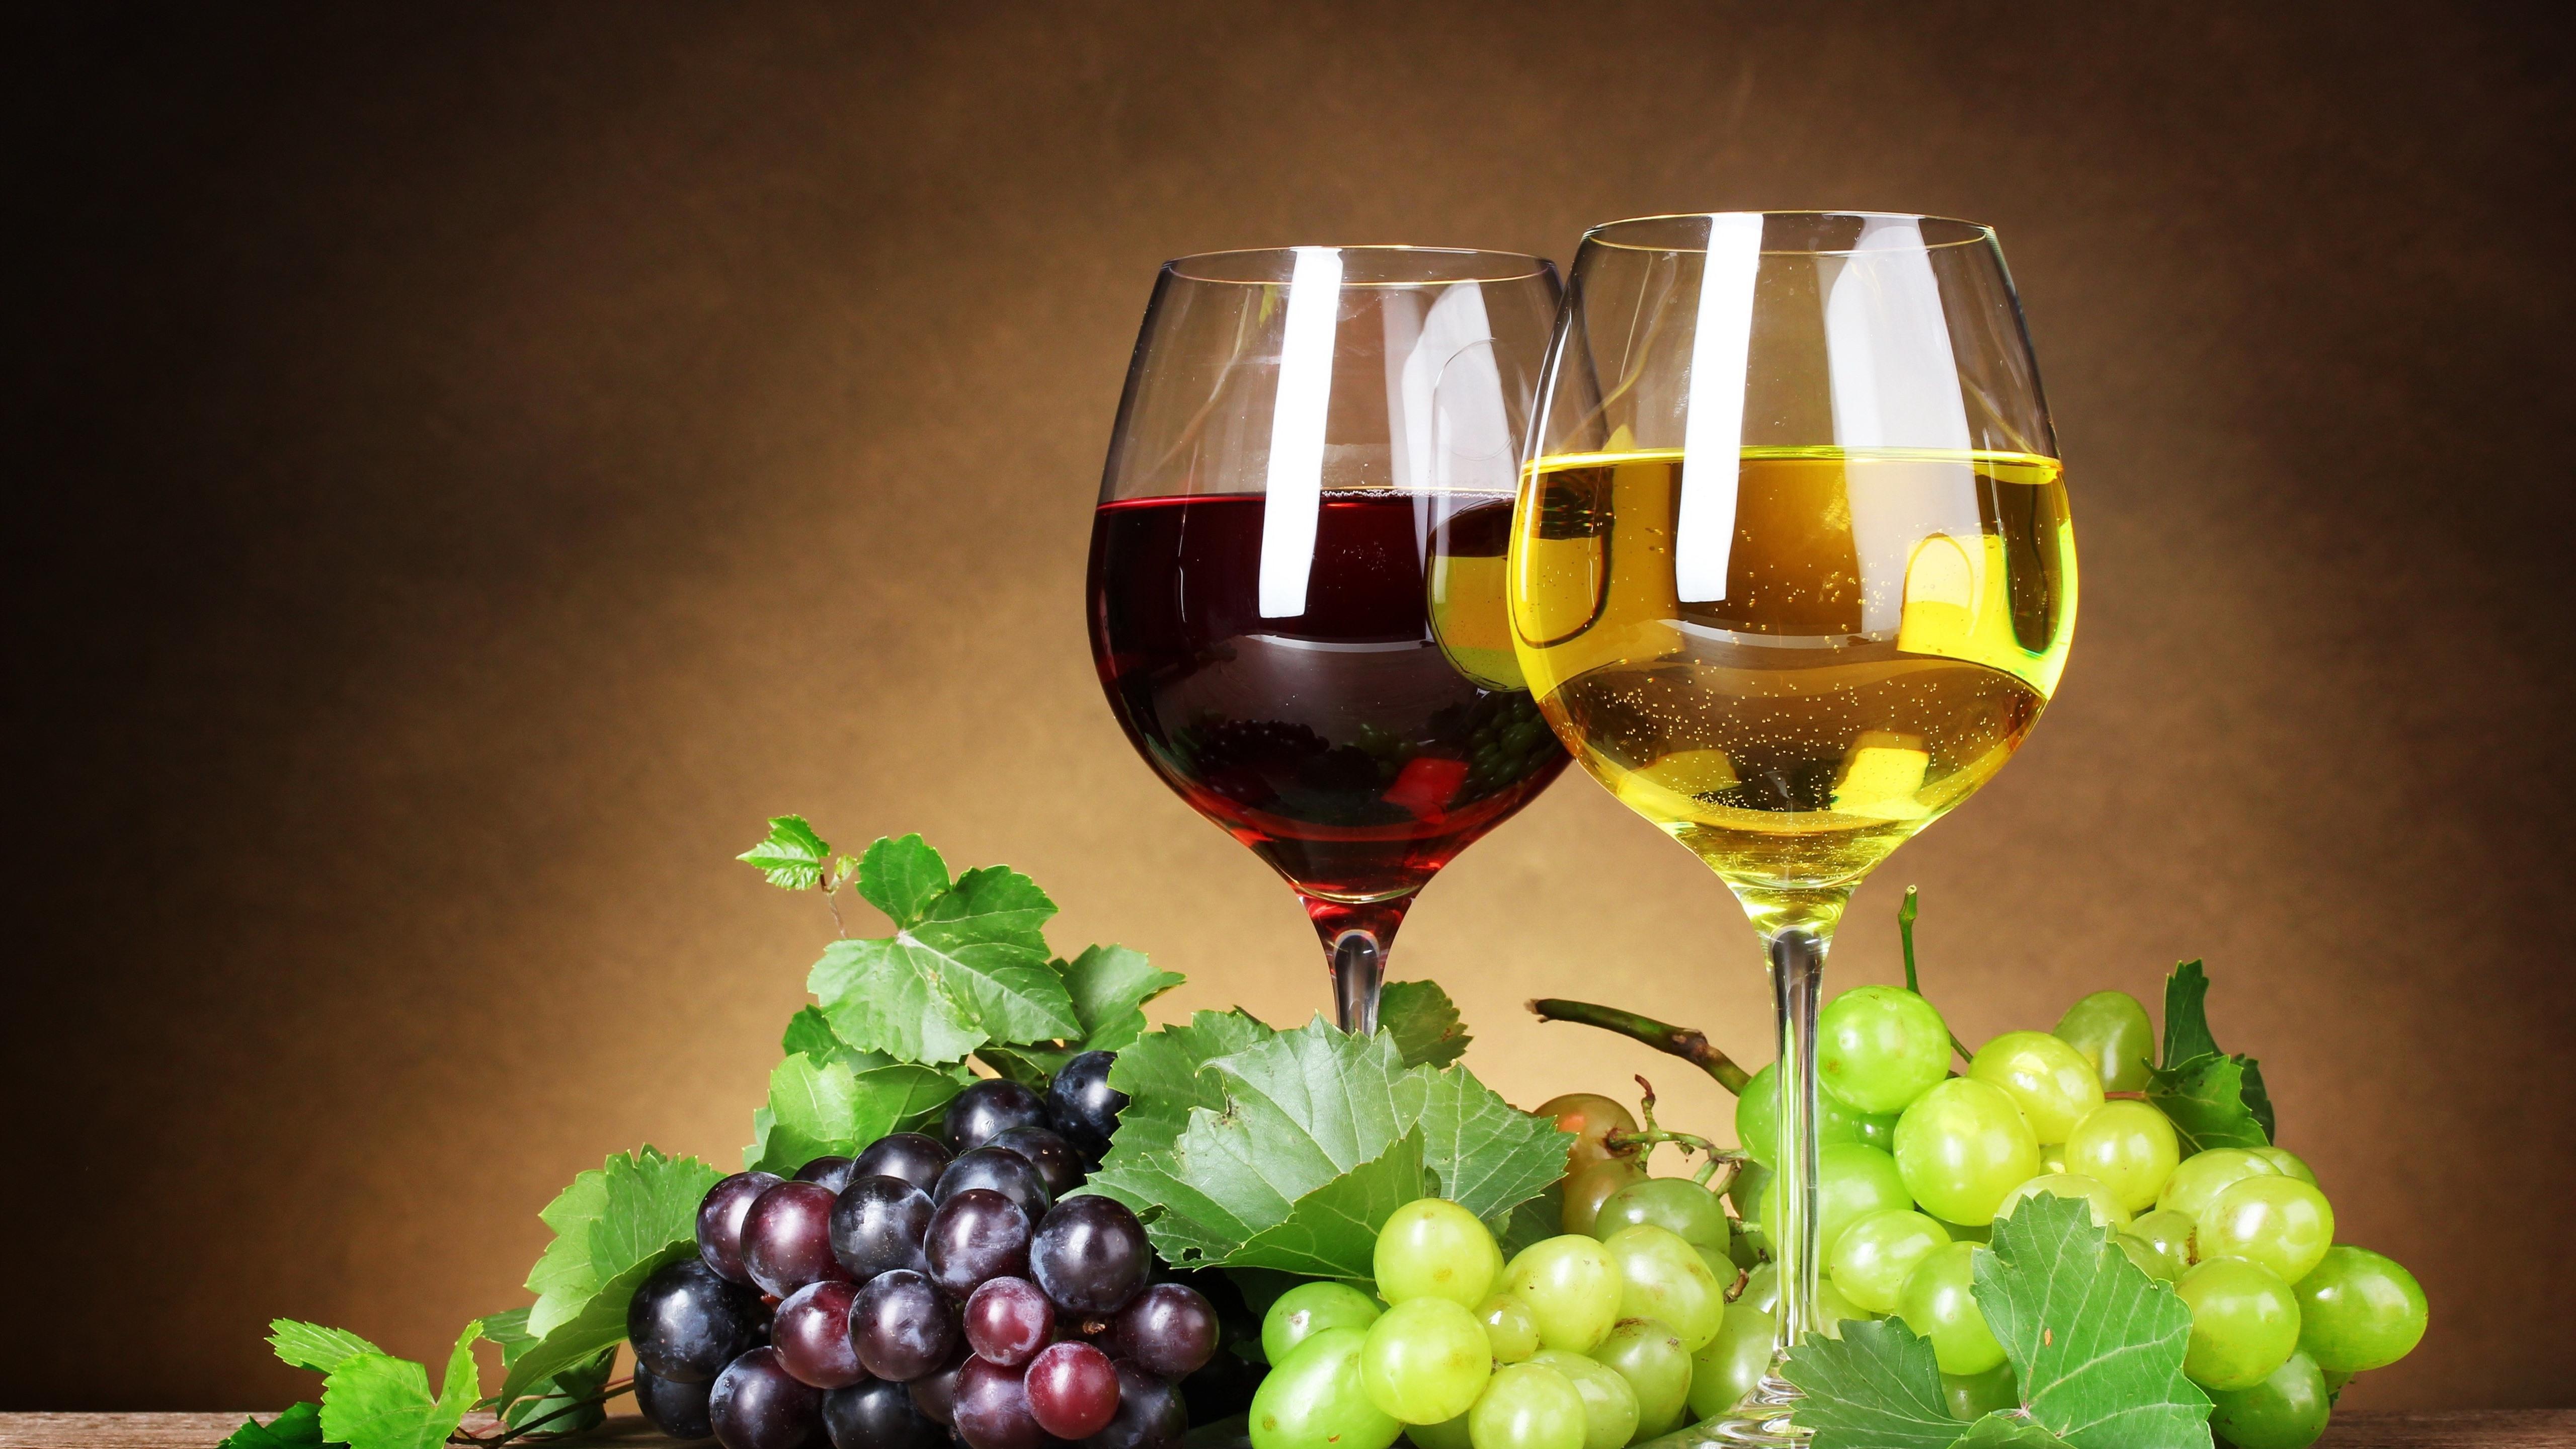 Wallpaper Grapes, red and white wine, glass cups 5120x2880 UHD 5K